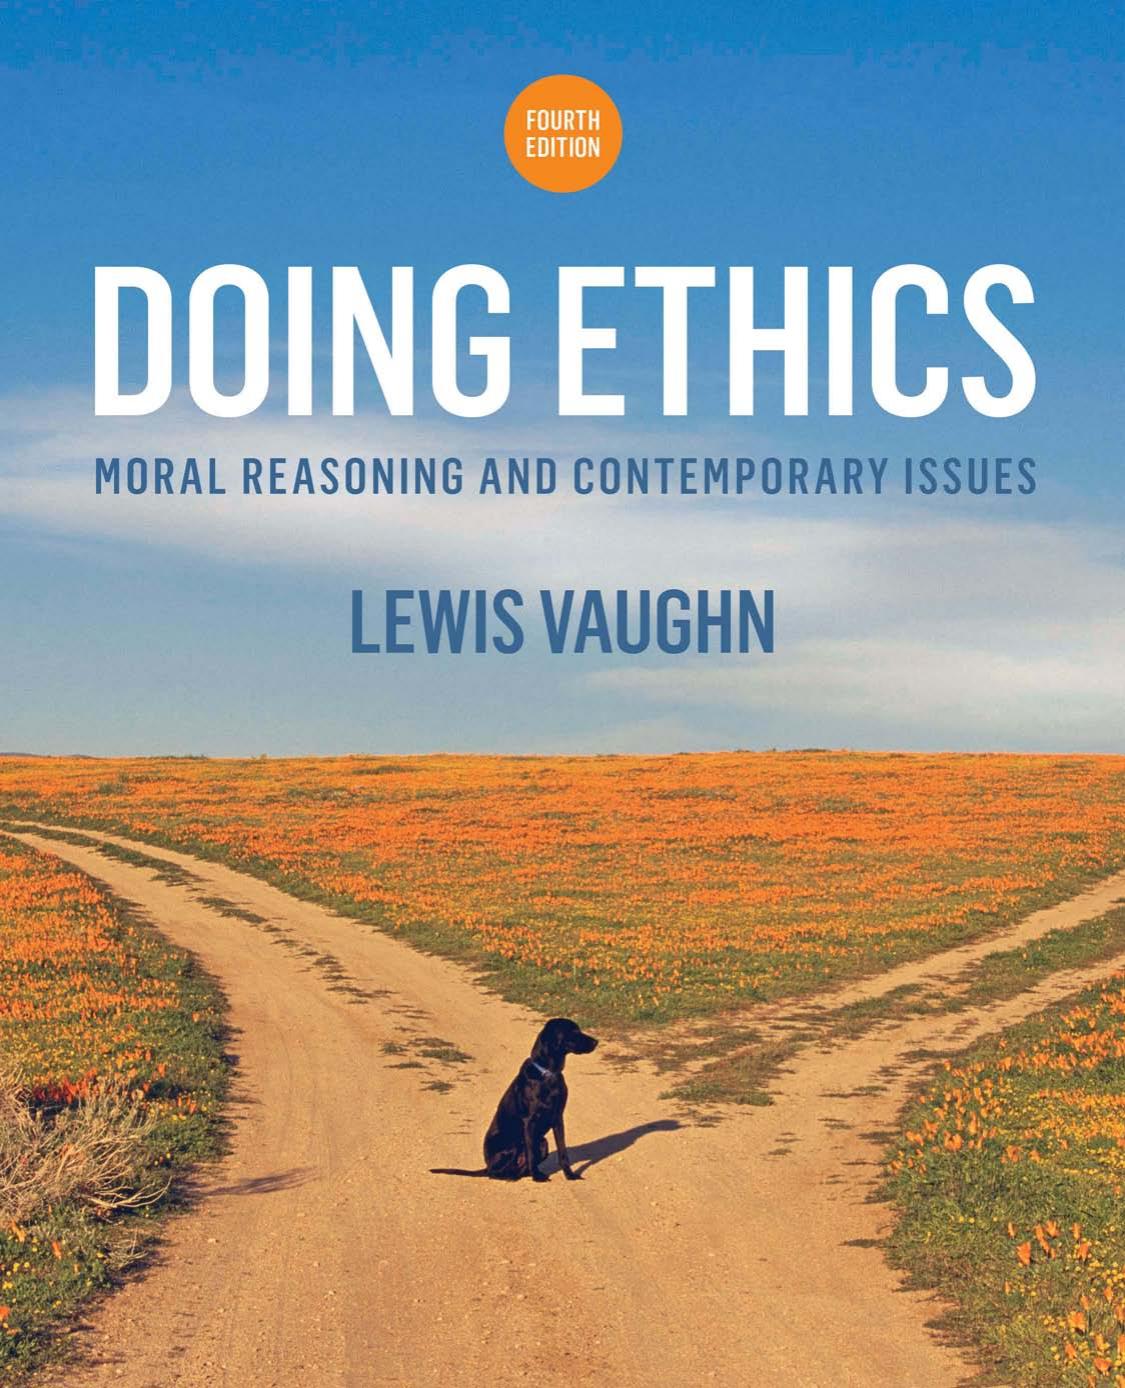 Doing Ethics Moral Reasoning and Contemporary Issues 4th Edition.jpg